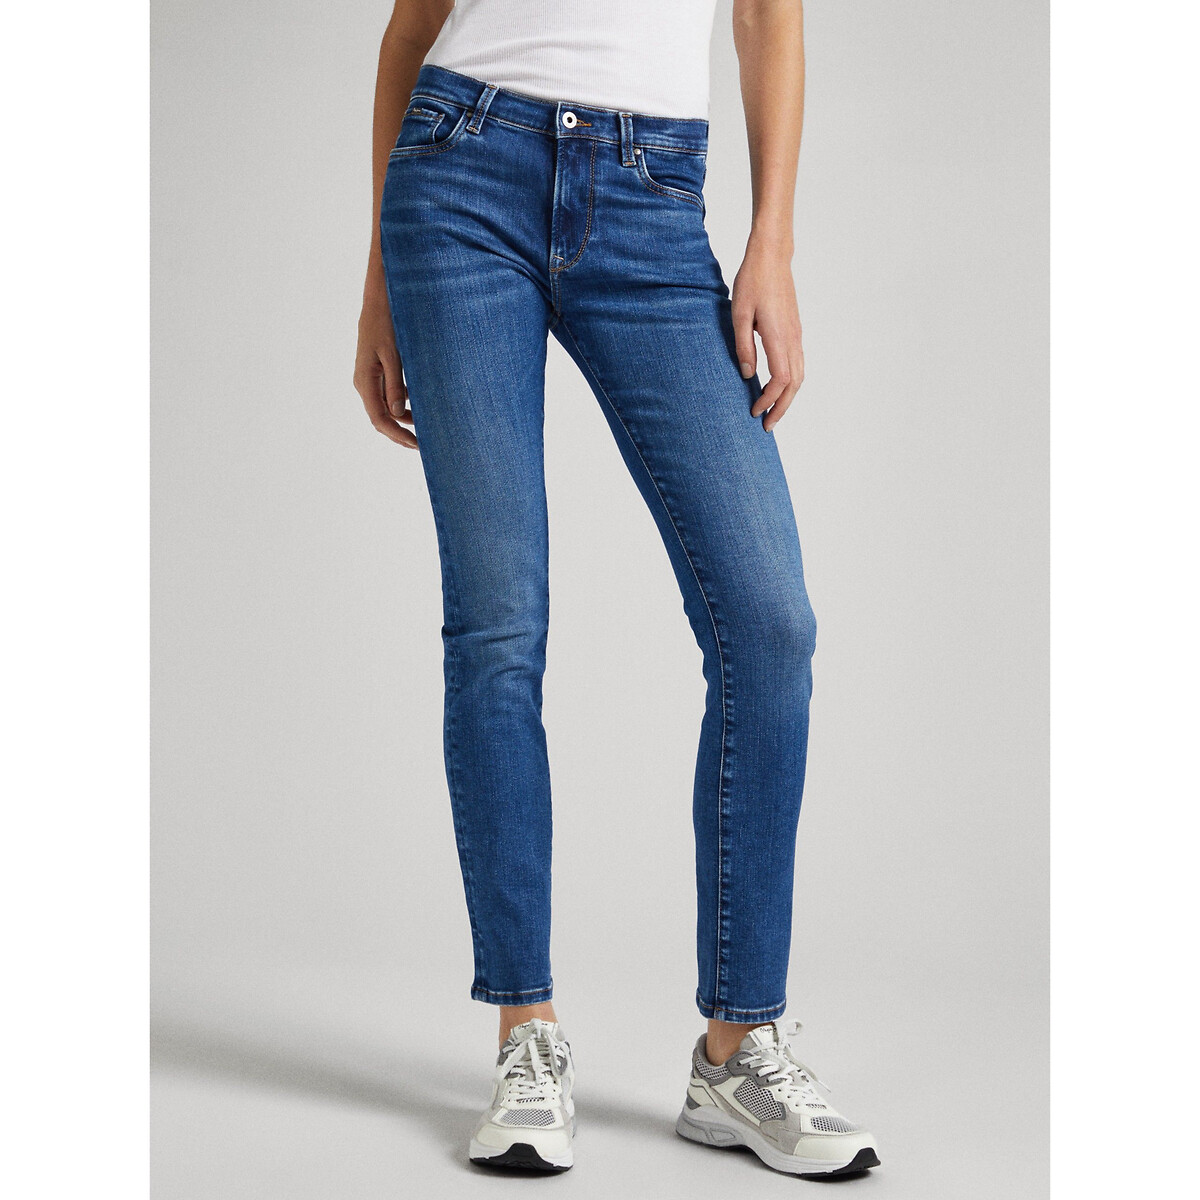 Image of Slim Fit Jeans with High Waist